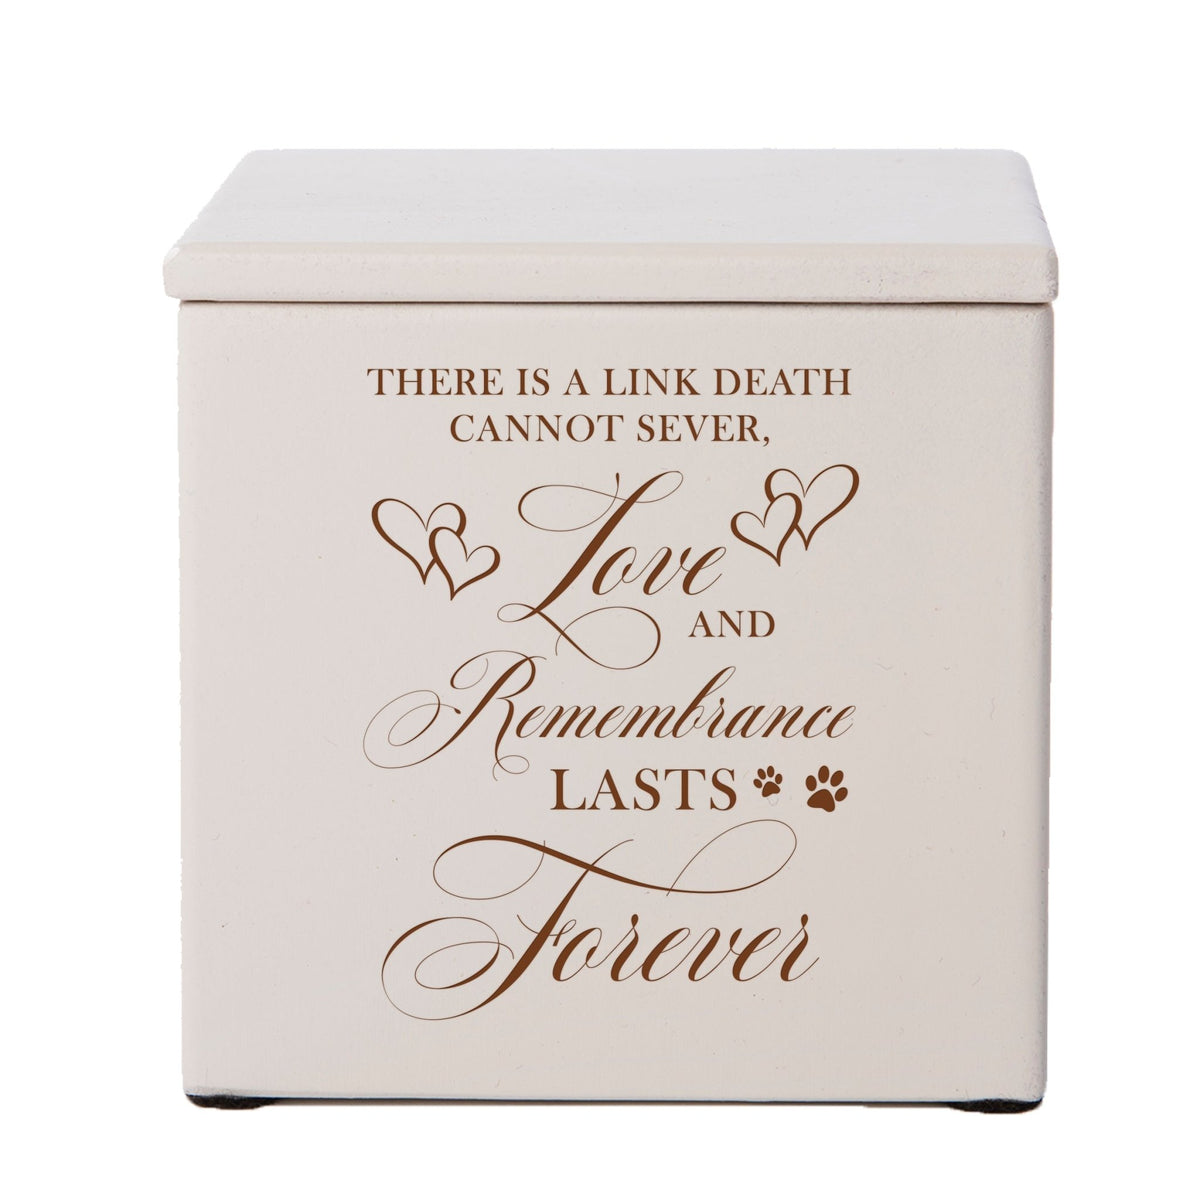 Pet Memorial Keepsake Cremation Urn Box for Dog or Cat - There Is A Link Death Cannot Sever - LifeSong Milestones